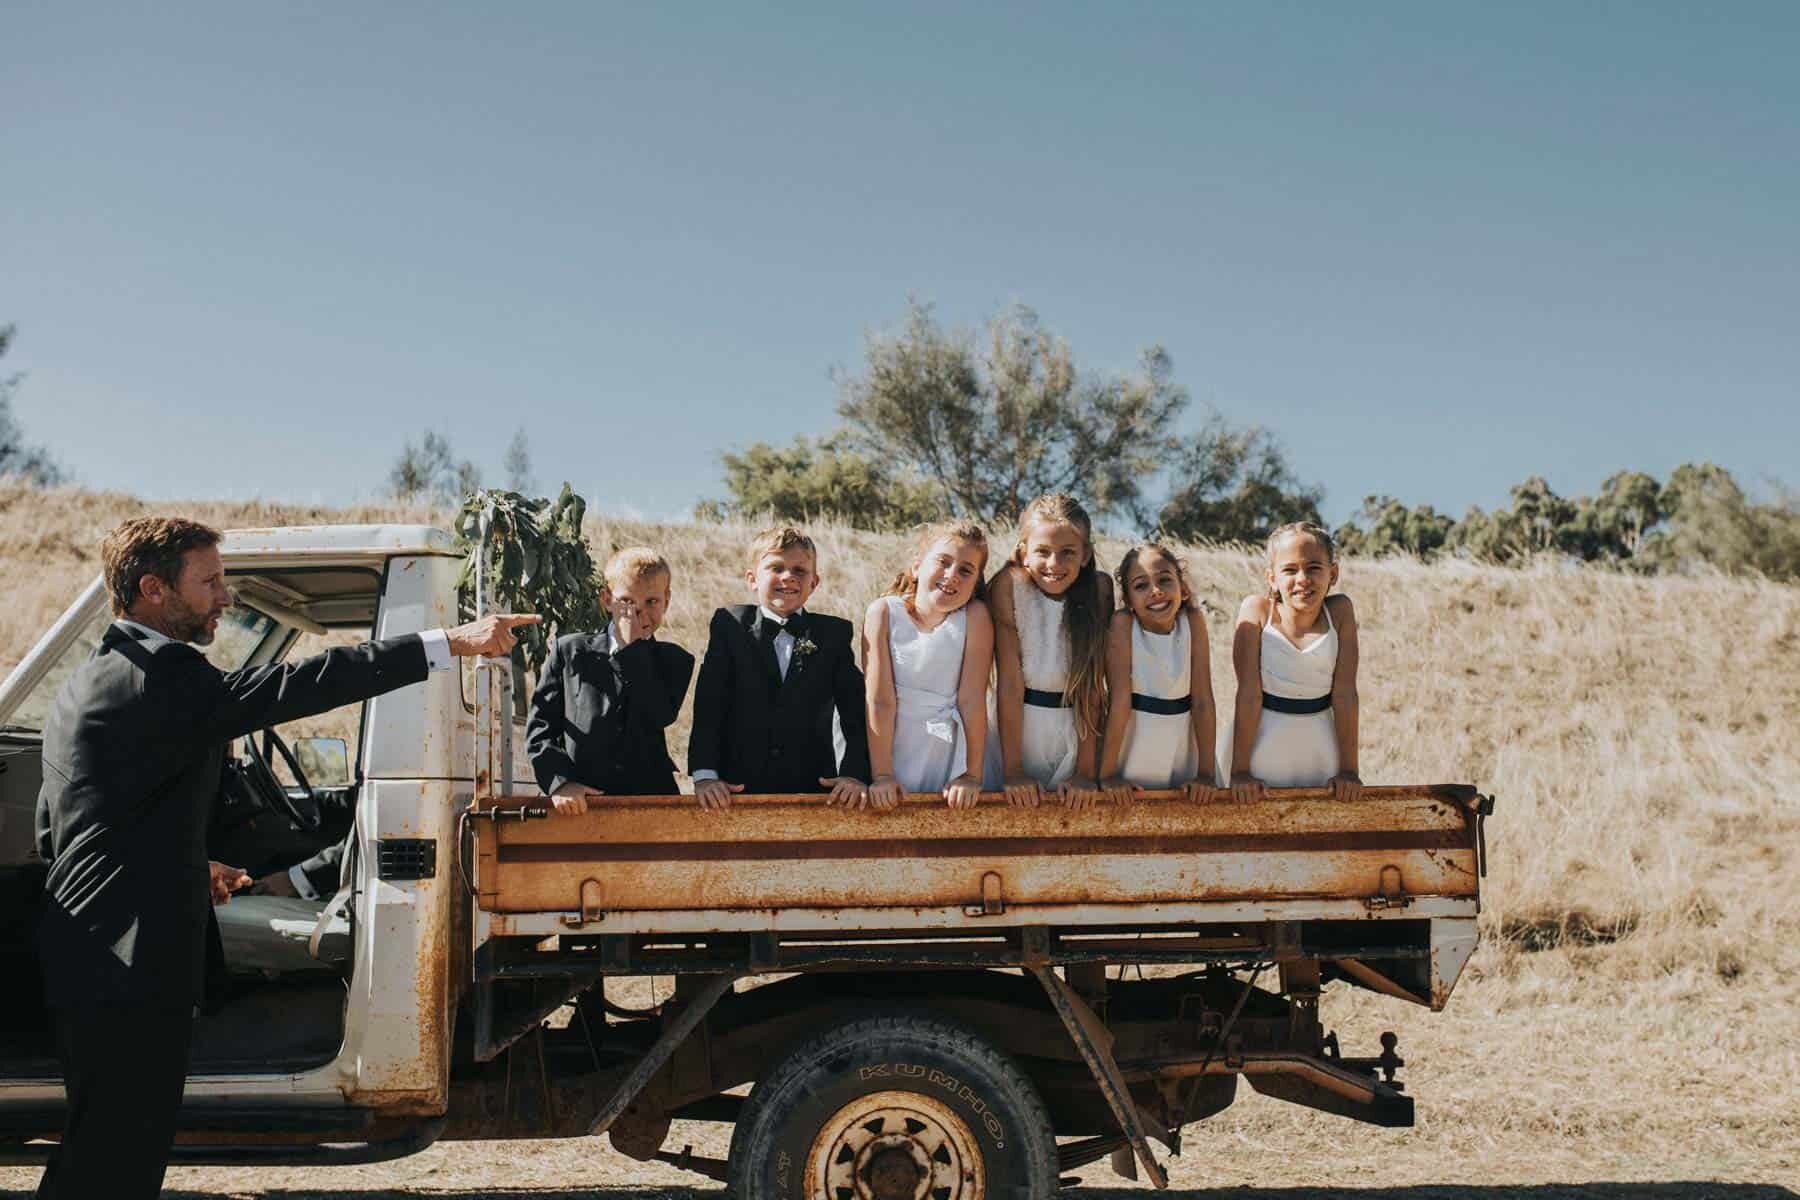 flower girls and page boys on an old ute - Australian wedding